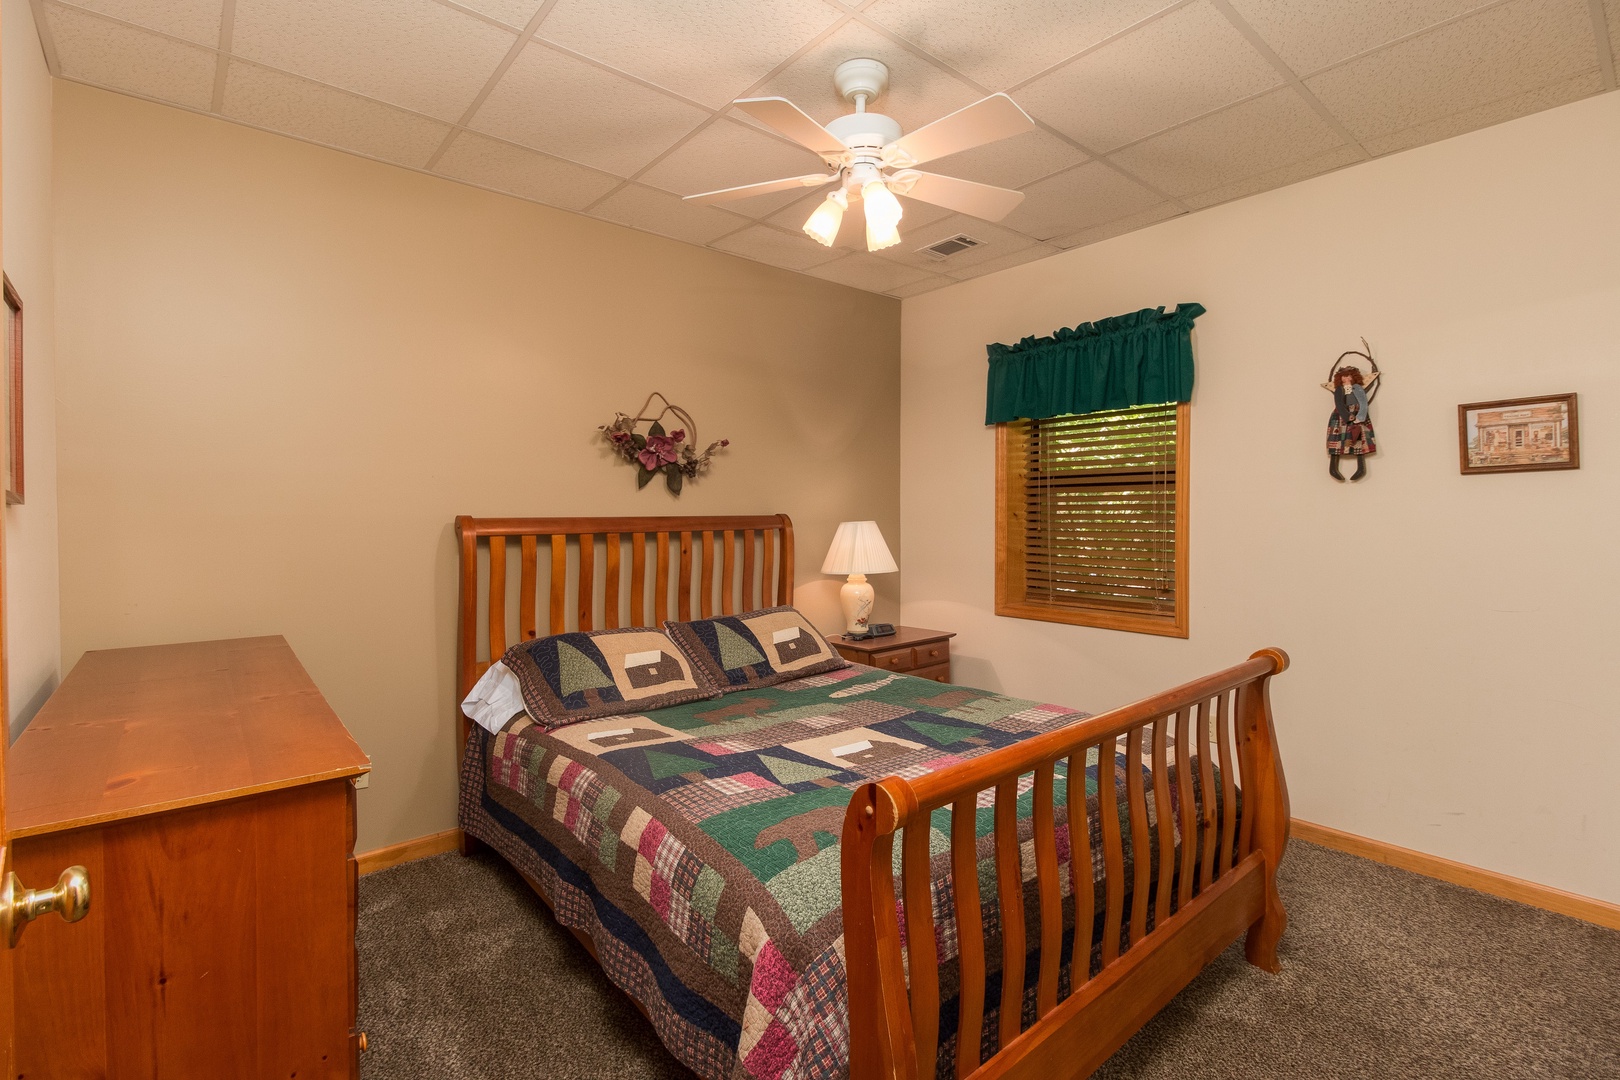 Bedroom with a bed, dresser, and night stand at Stones Throw, a 4 bedroom cabin rental located in Pigeon Forge